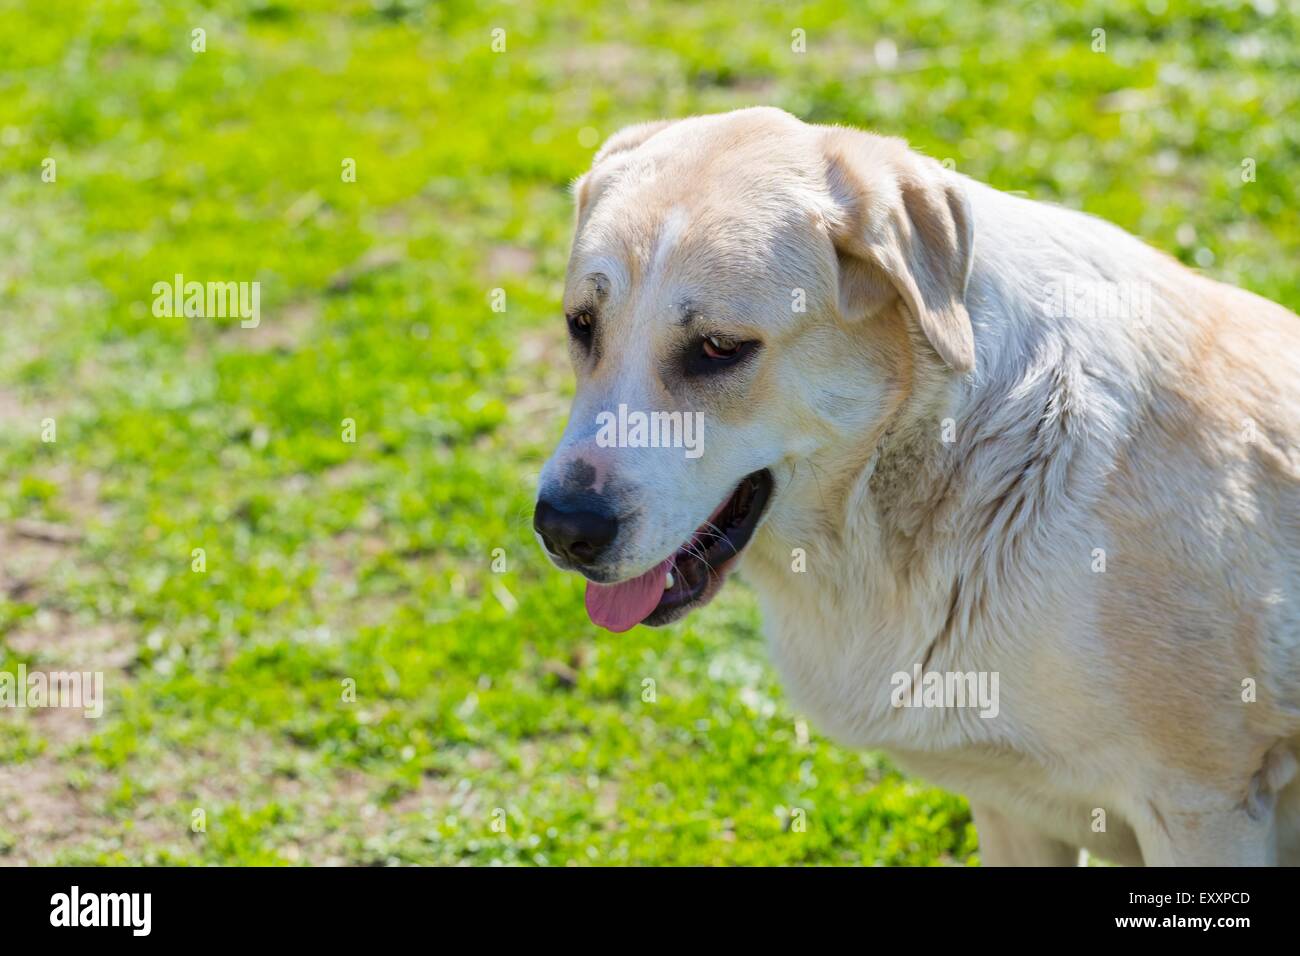 Big dog portrait. Face of animal on green outdoor background. Stock Photo